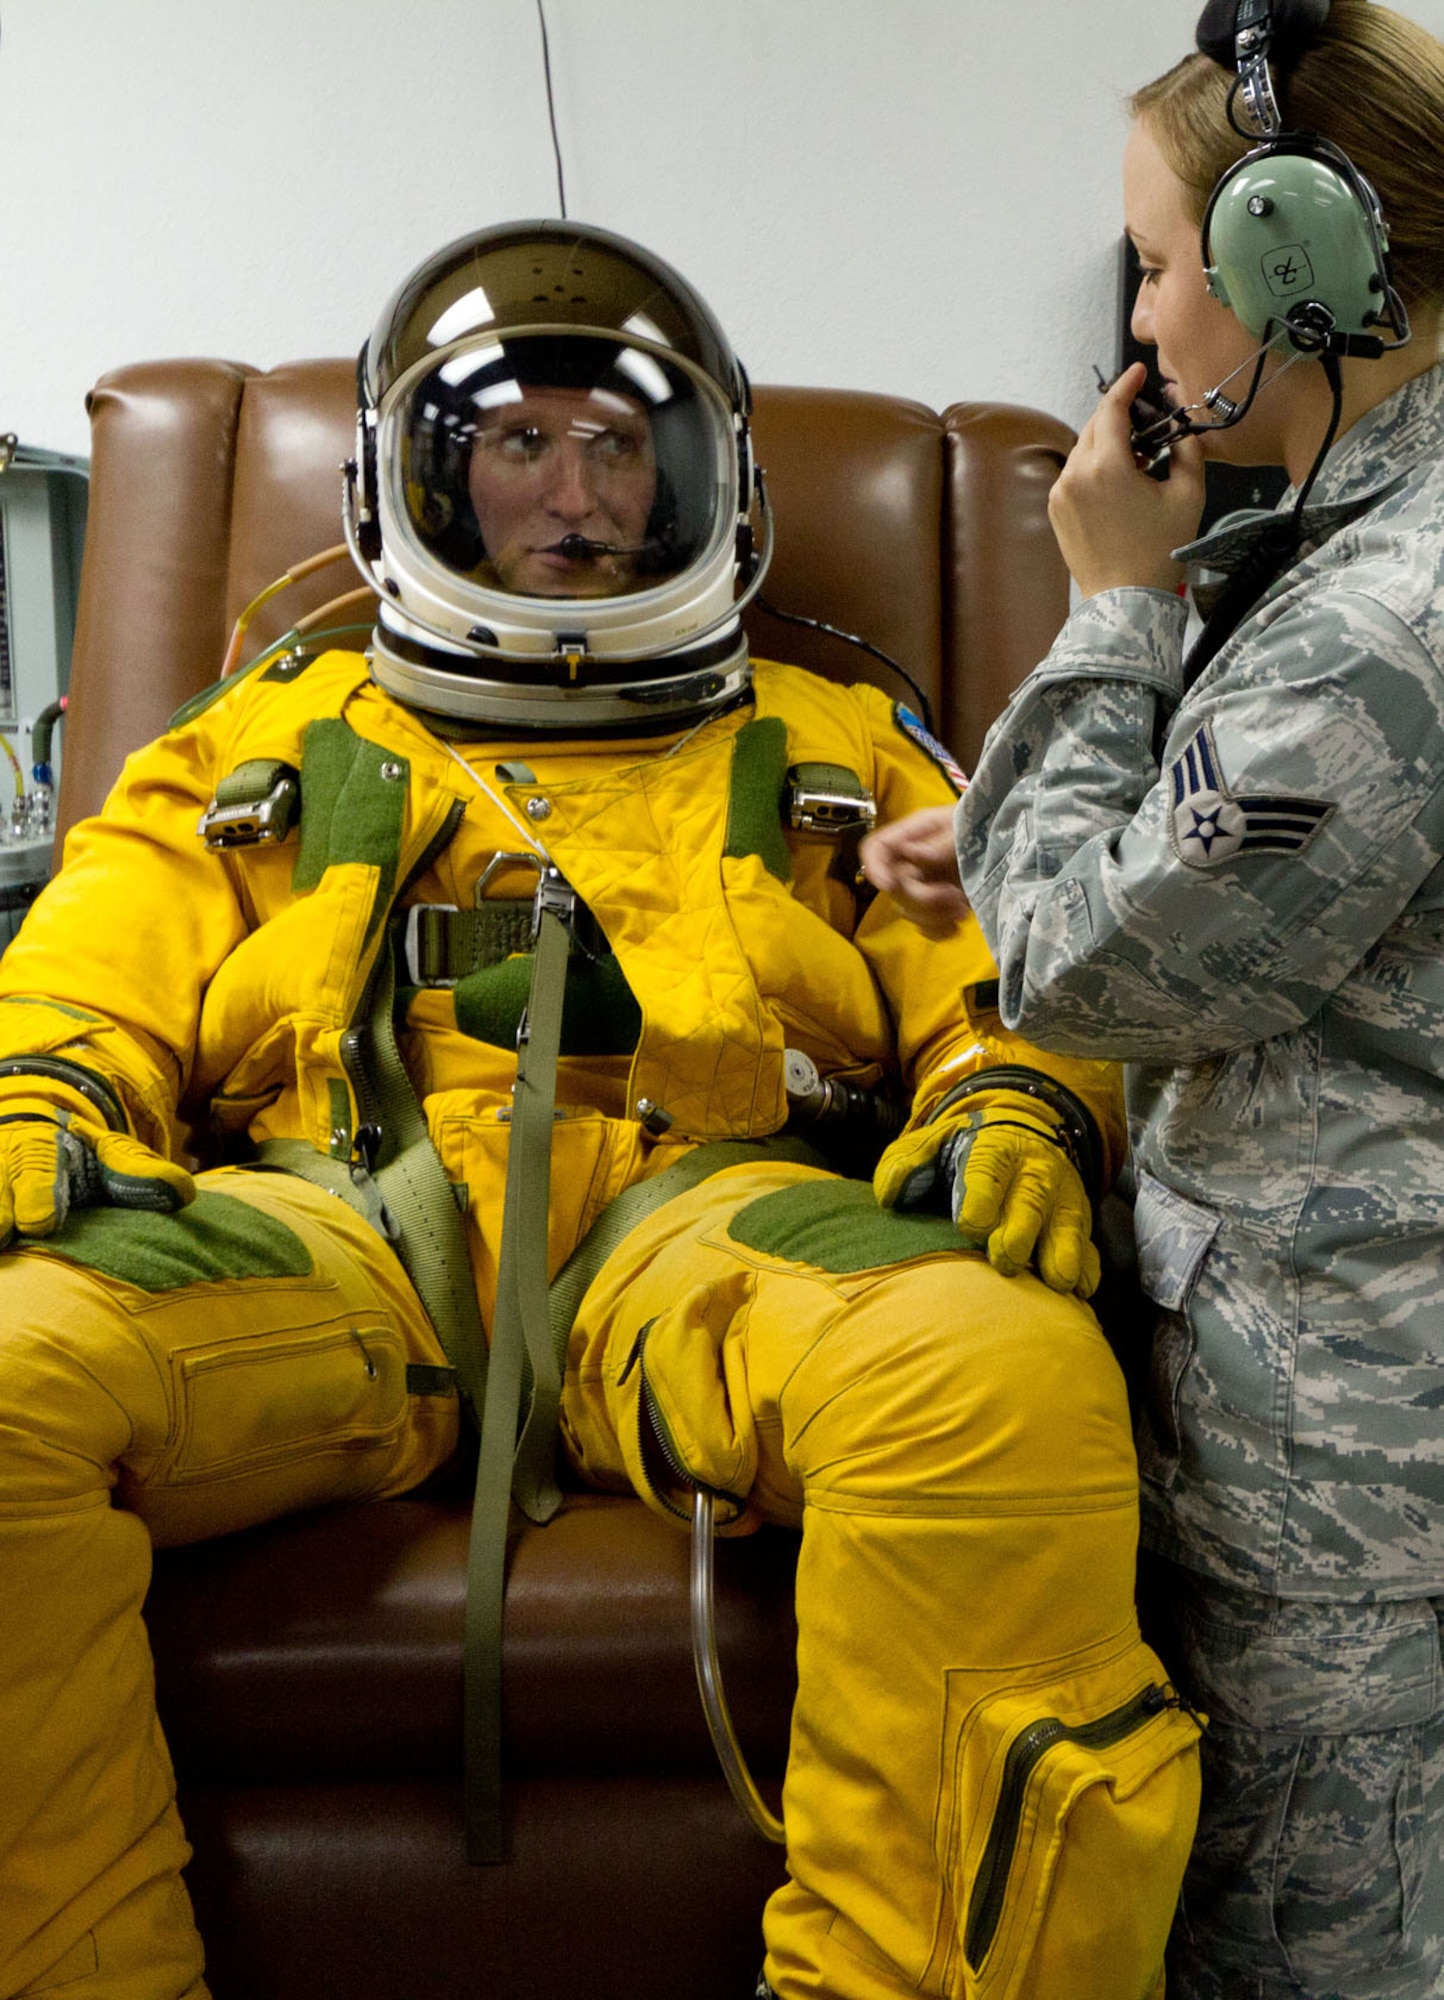 SOUTHWEST ASIA - U.S. Air Force Senior Airman Cortney Reeb, 99th Expeditionary Reconnaissance Squadron physiology support detachment technician, communicates with Capt. Peter, 99th ERS U-2 pilot, to verify his microphone is working properly July 17, 2012. The U-2 routinely flies at altitudes in excess of 70,000 feet, which requires the pilot to wear a full-pressure suit similar to that of astronauts.(U.S. Air Force photo/Senior Airman Alexander Recupero)